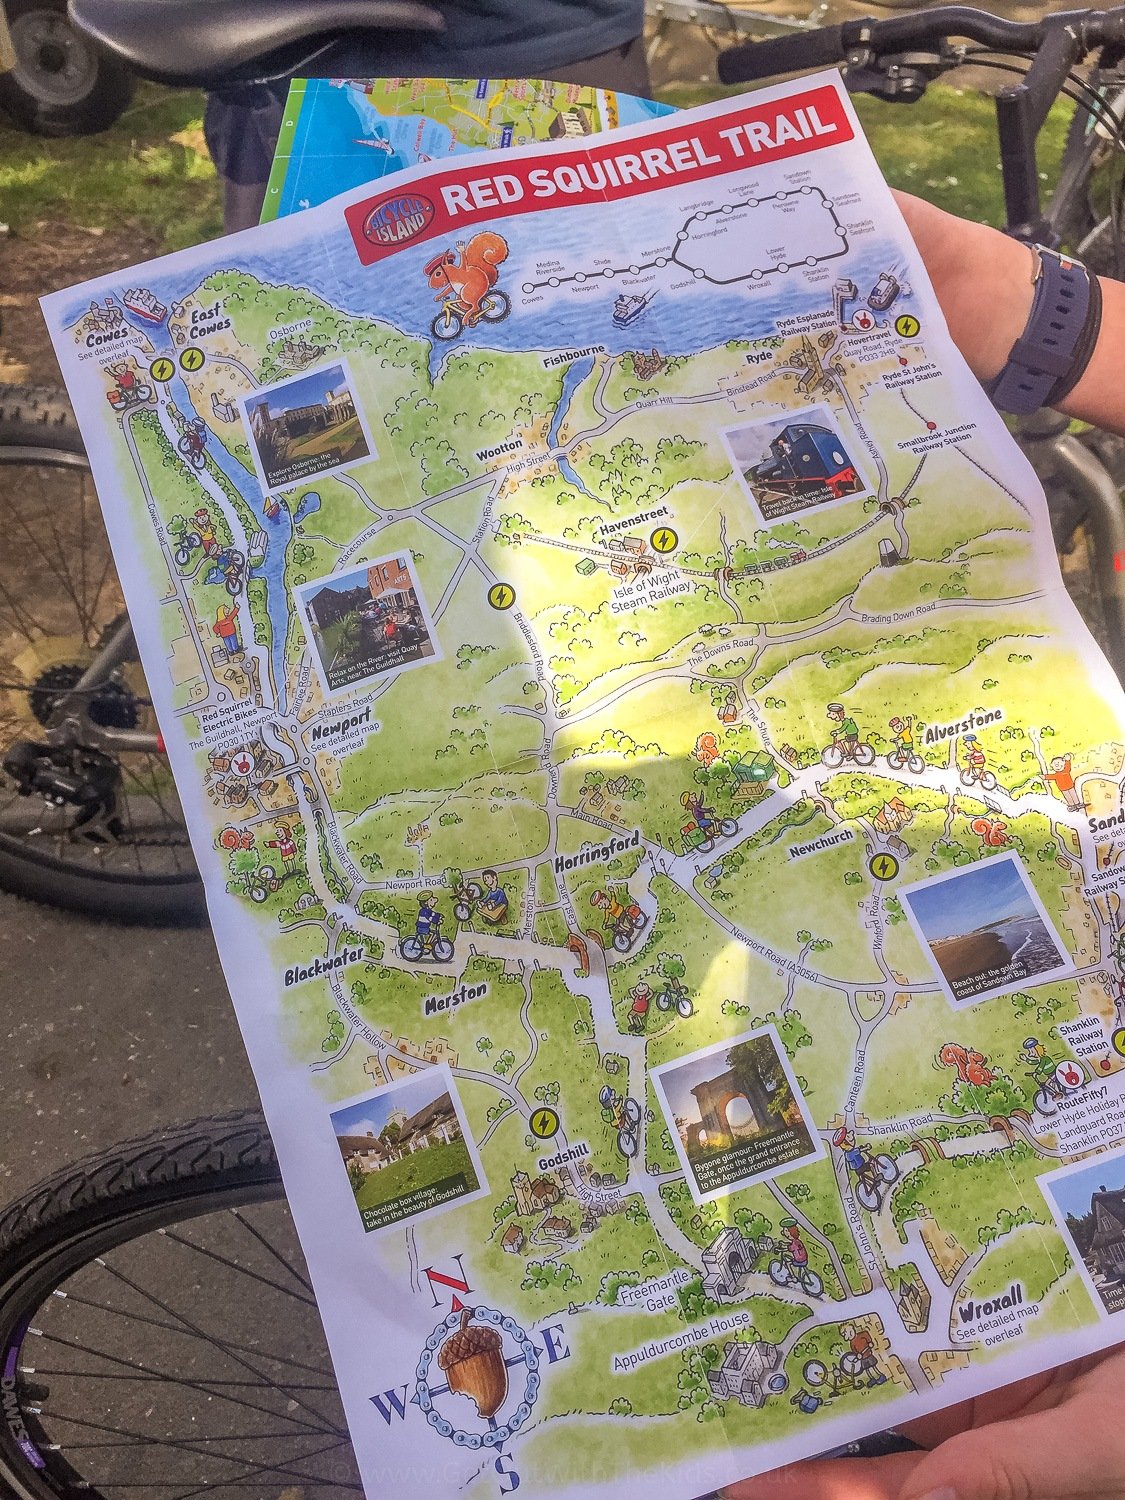 The Red Squirrel Trail map leaflet